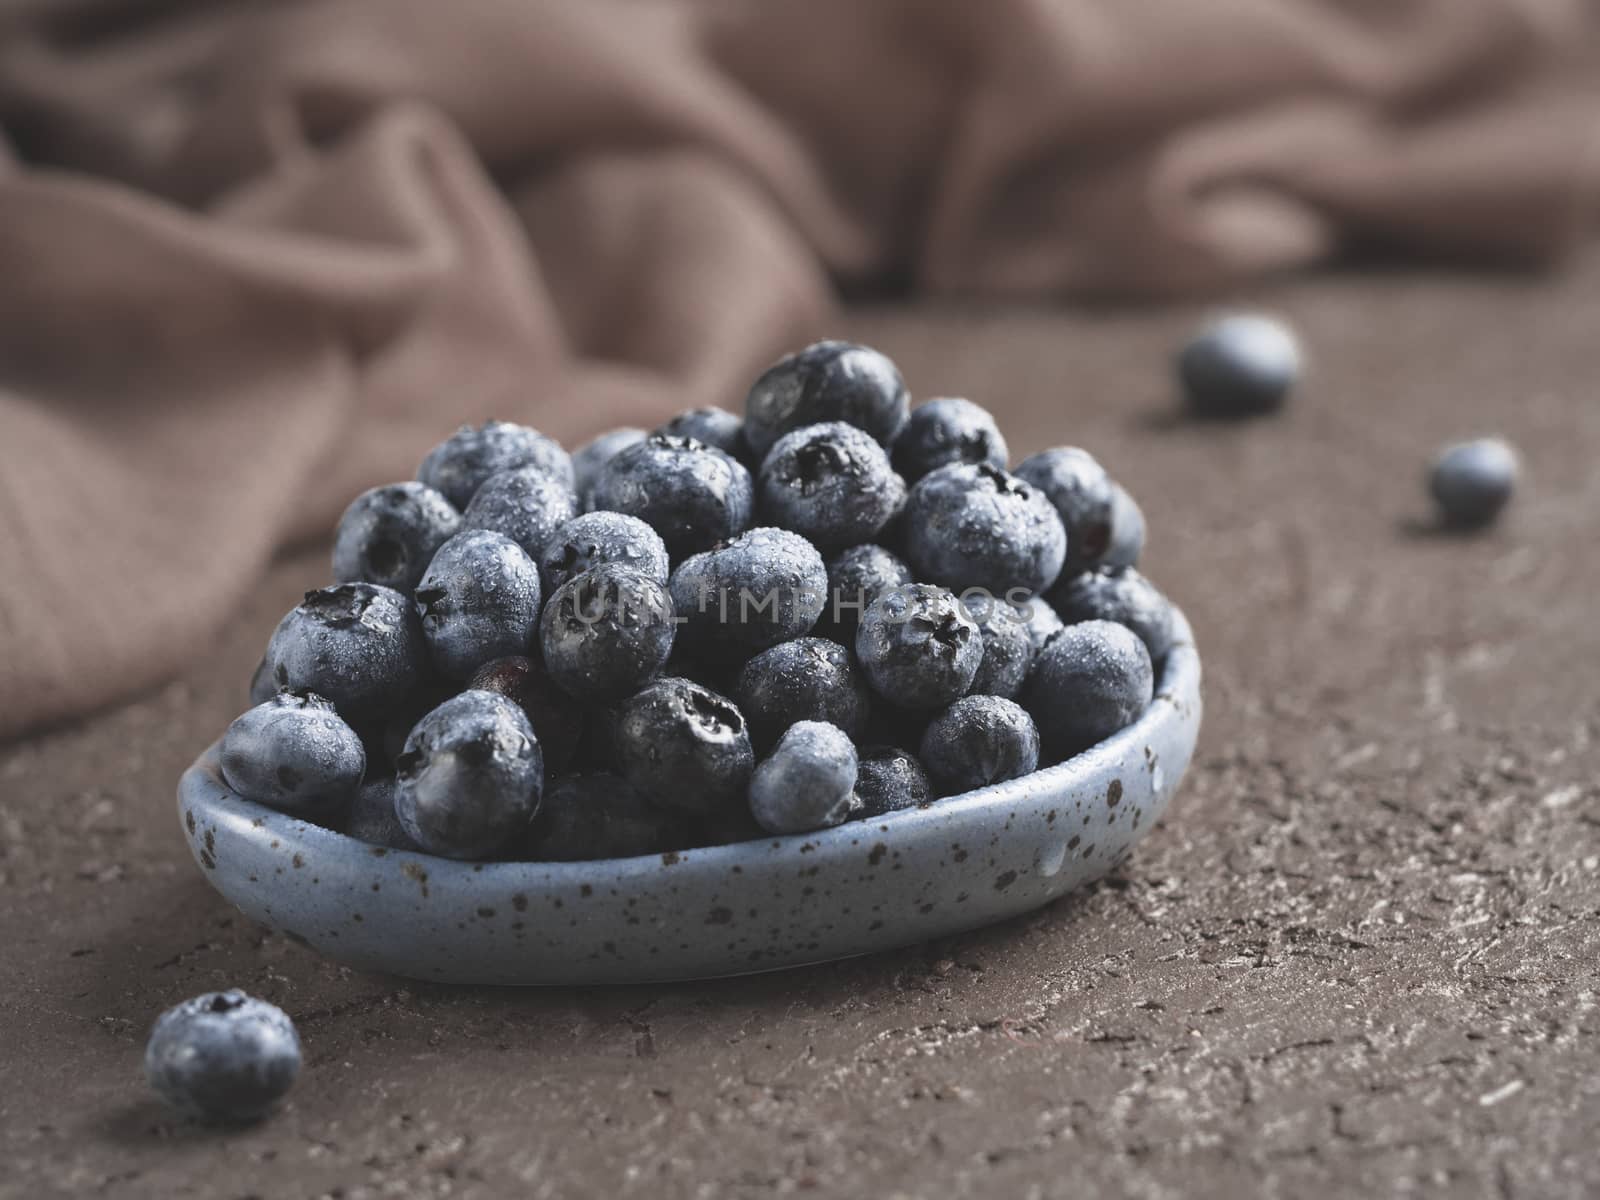 Blueberries in plate on brown concrete background. Fresh picked bilberries close up. Copyspace. Close up